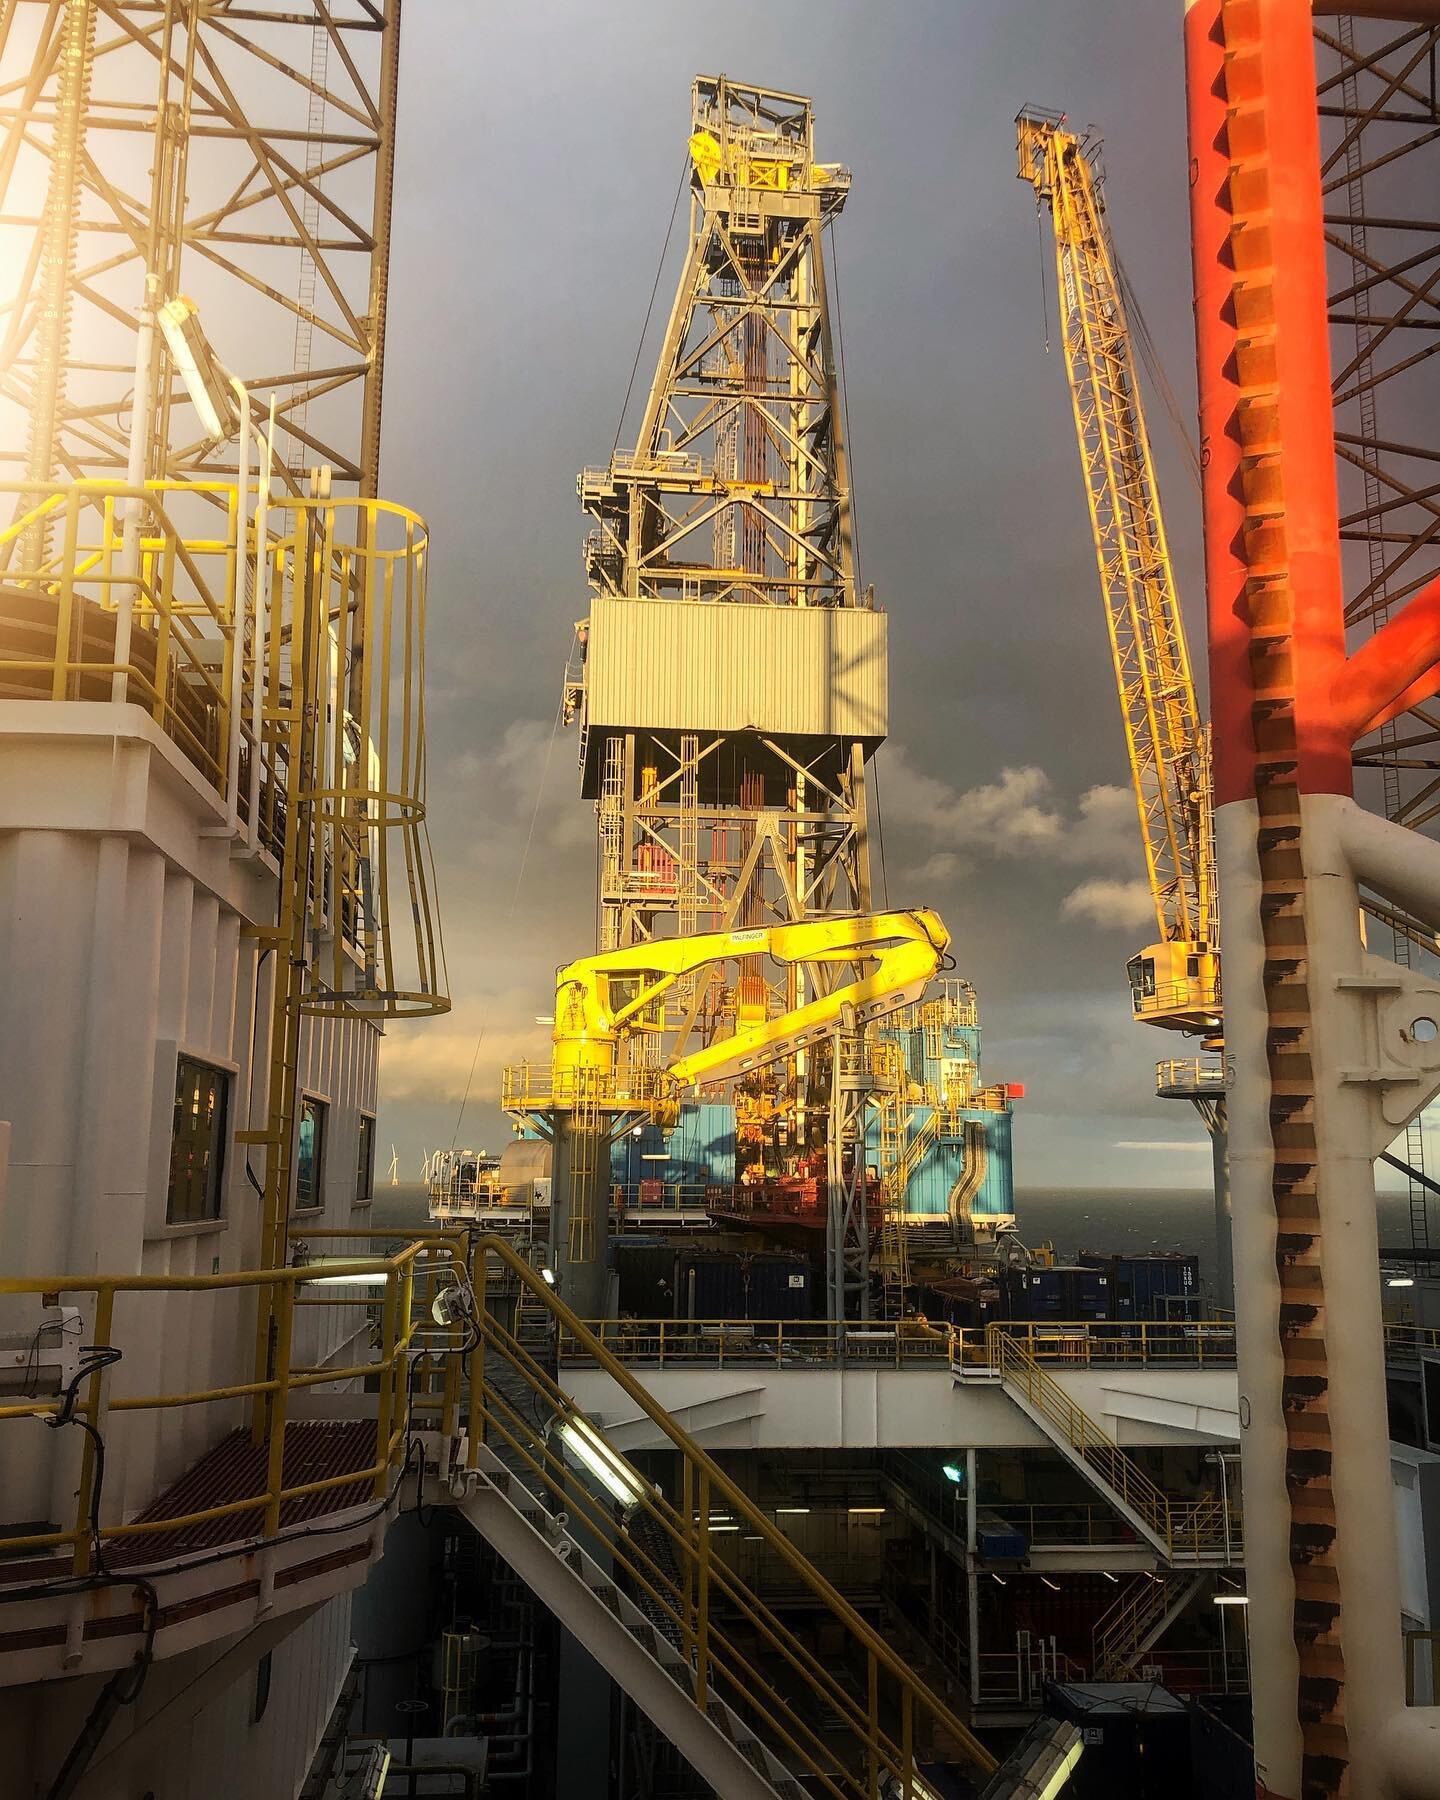 📷 Centre frame is a drilling Derrick, the money maker on a drilling asset. 
This one  is 170ft high, with a hook load capacity of 2,000,000lbs. (900Te approx.)
.
Did you know - The name Derrick comes from Thomas Derrick who was an English executione